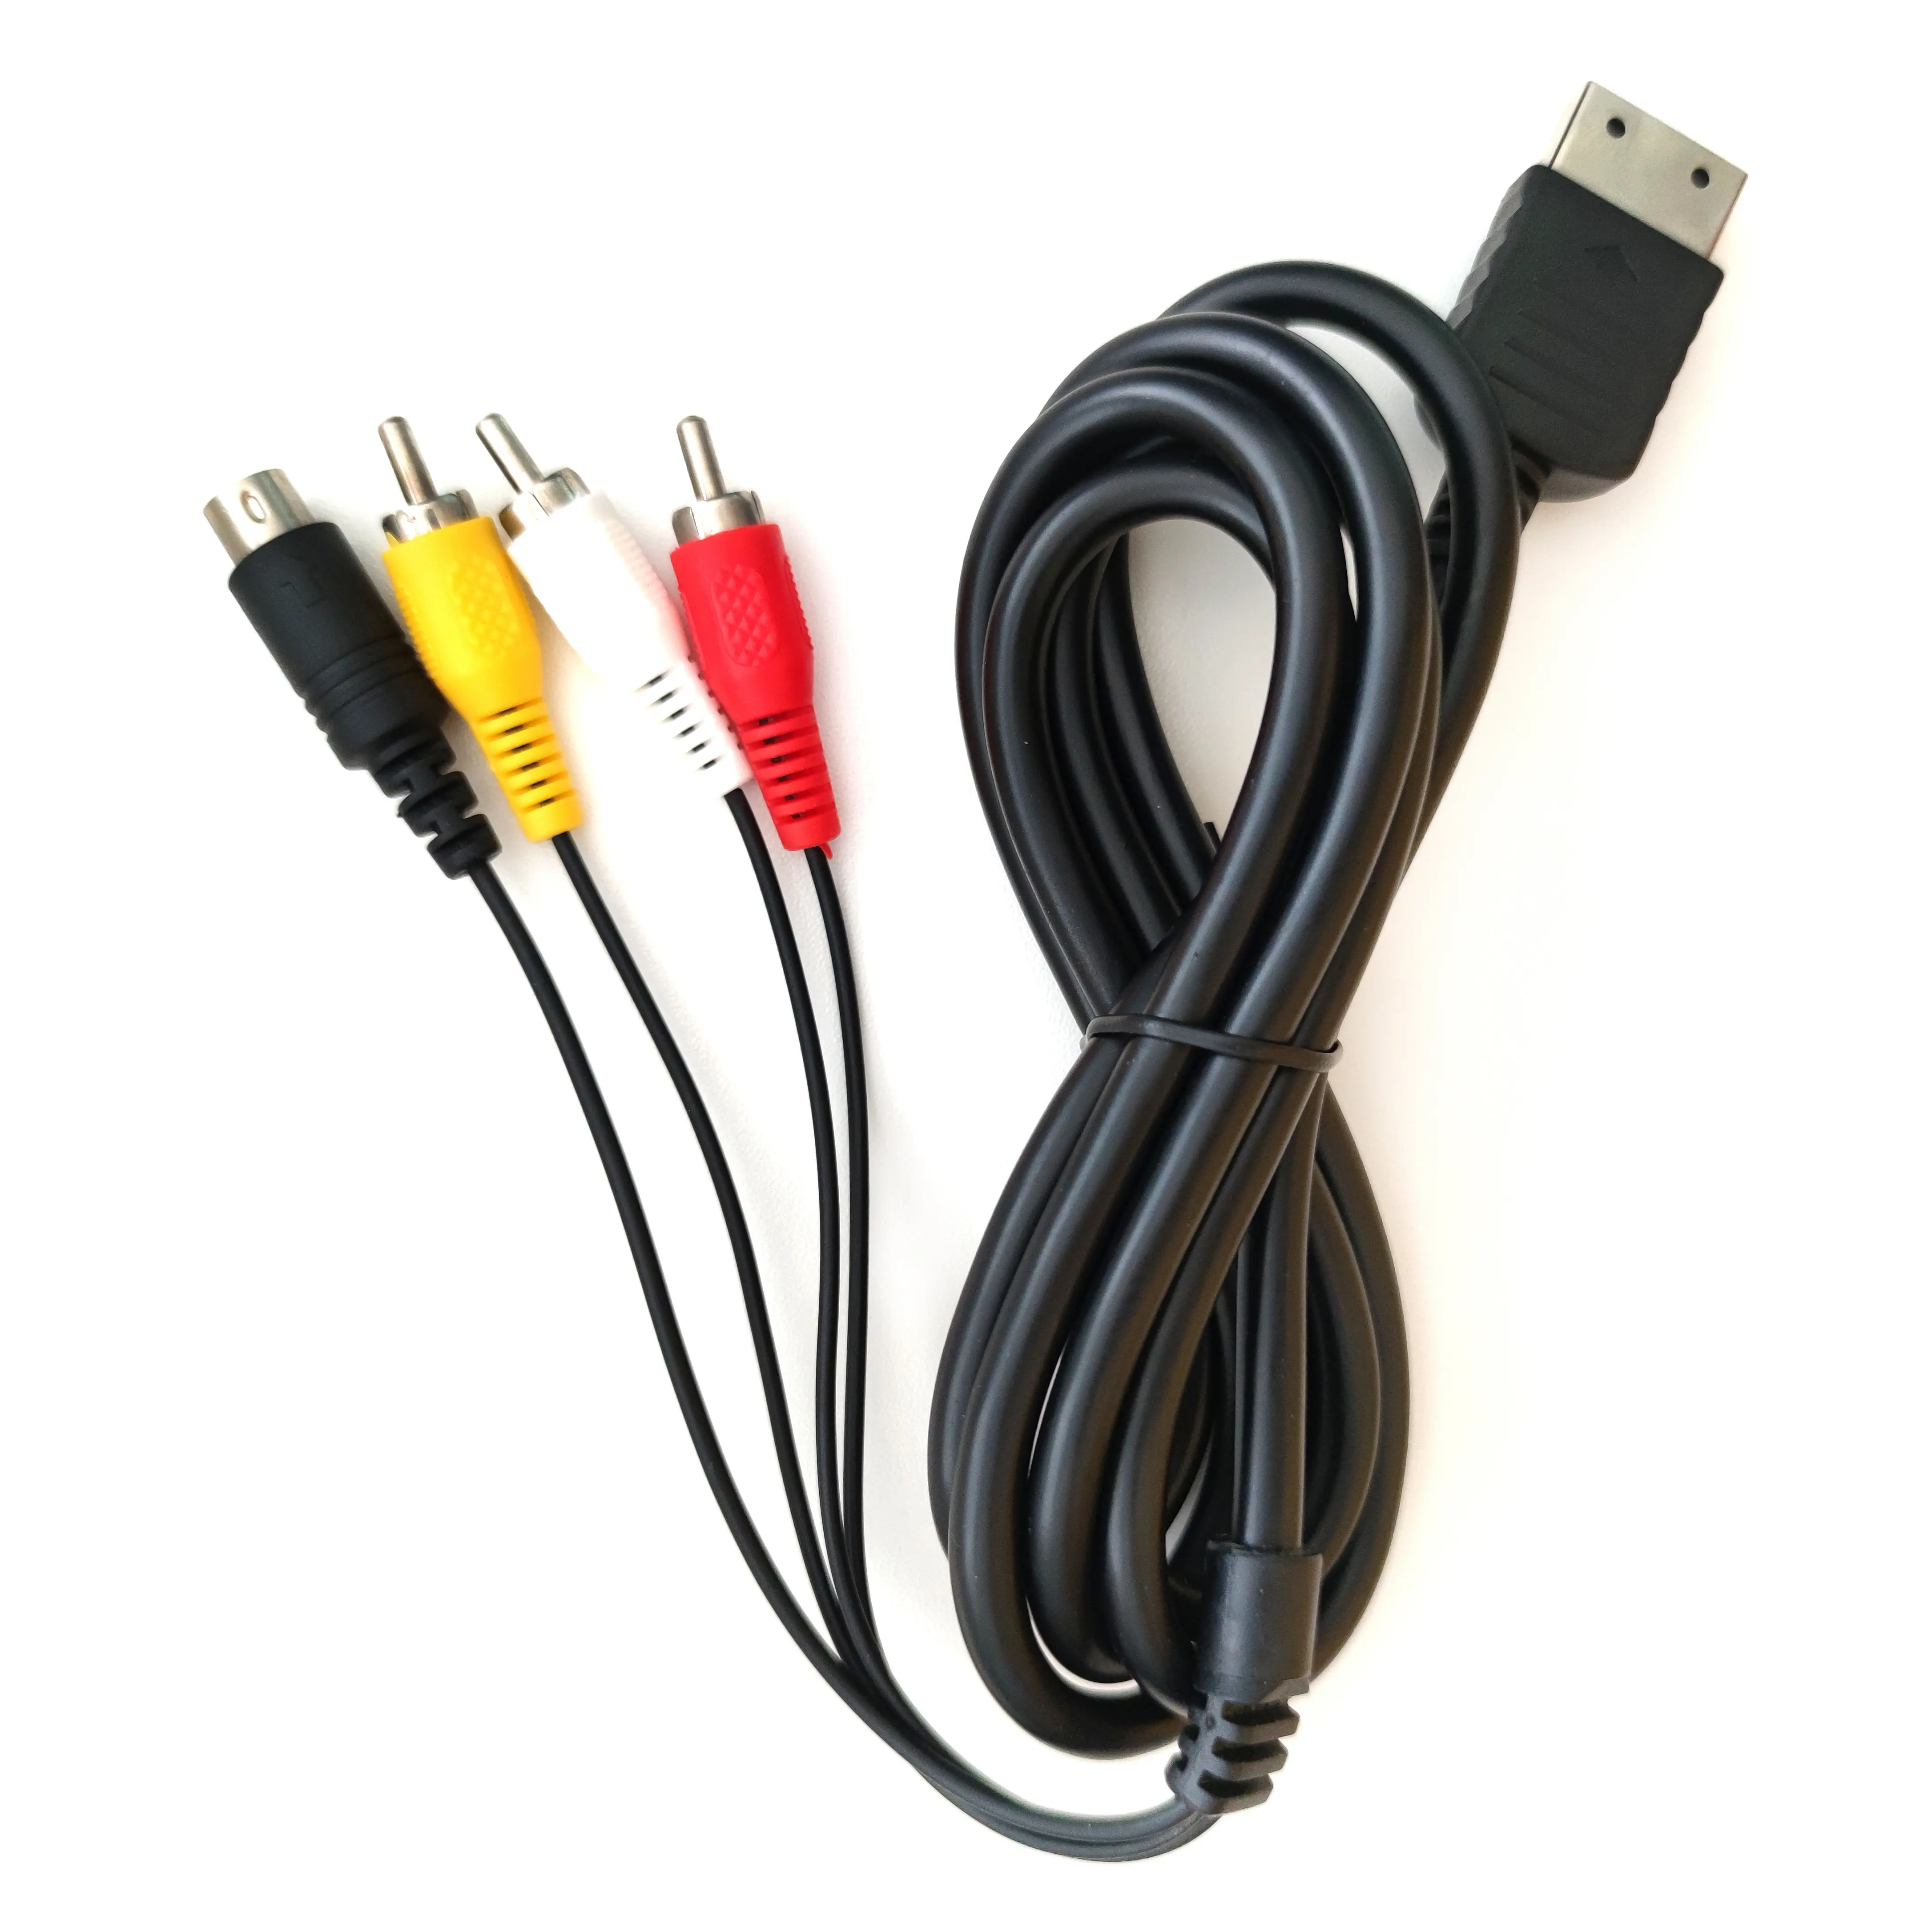 Wholesale New S-Video A/V Cable for Sega Dreamcast 128 Systems AV Cable